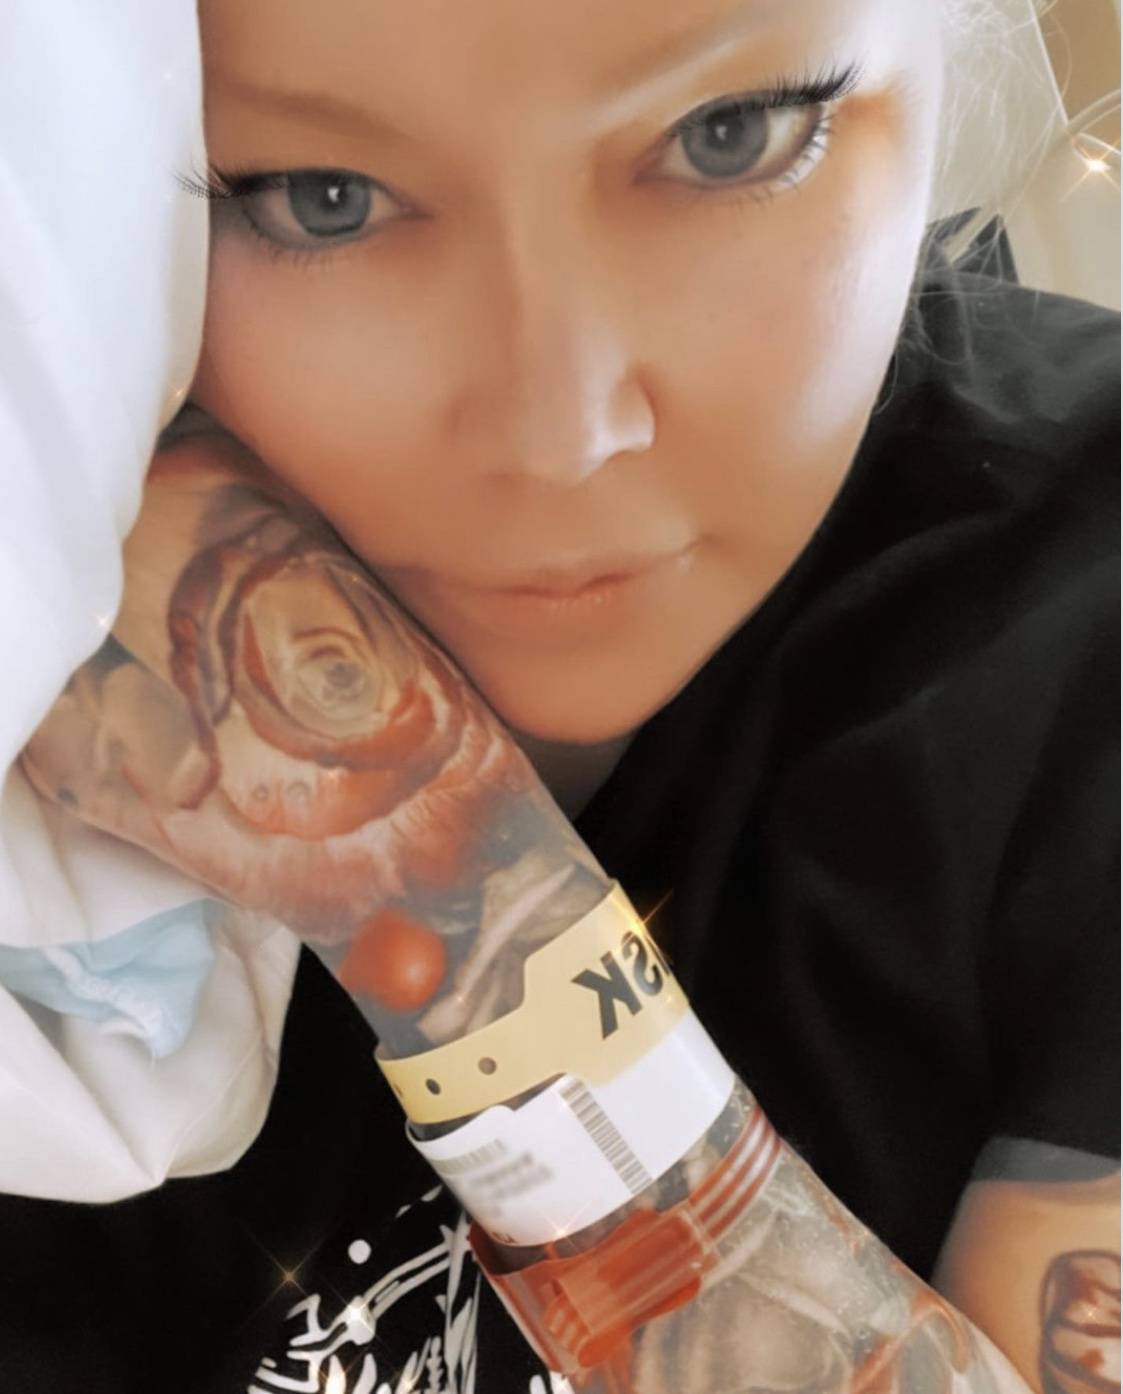 Jenna Jameson Returns Home From Hospital But Is 'Still in a Wheelchair'